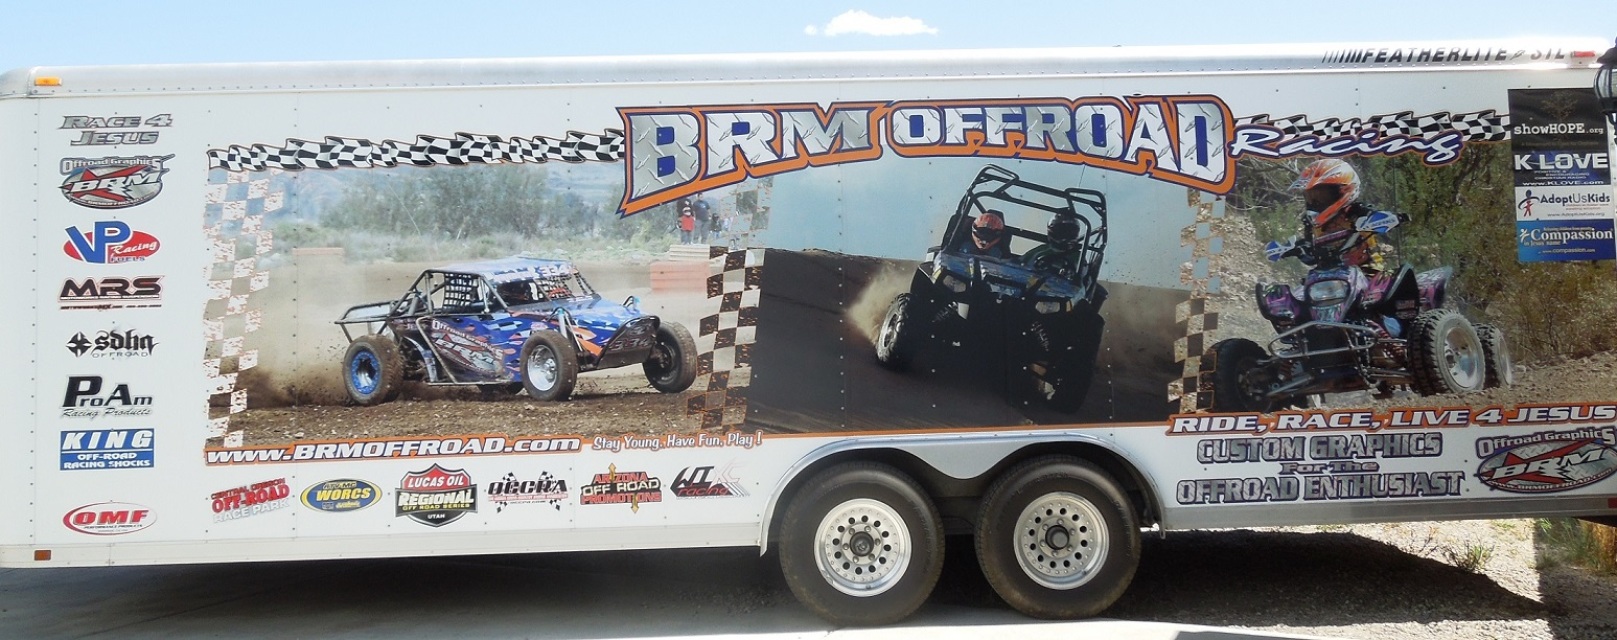 BRM Offroad Graphics - Jersey Lettering!